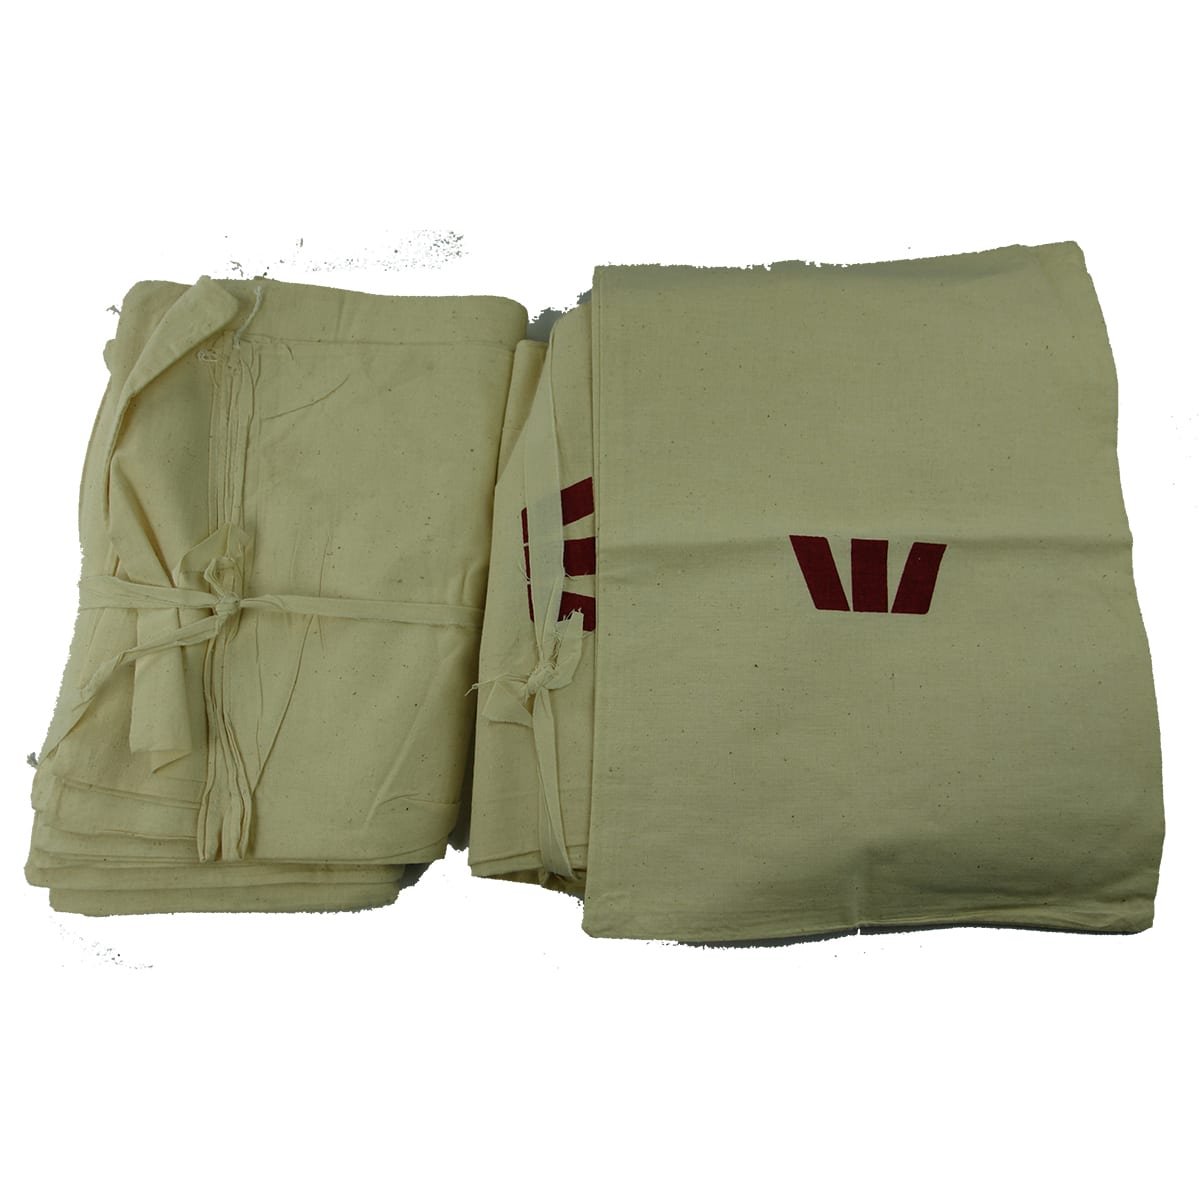 Moneybags! Westpac W logo on sides.